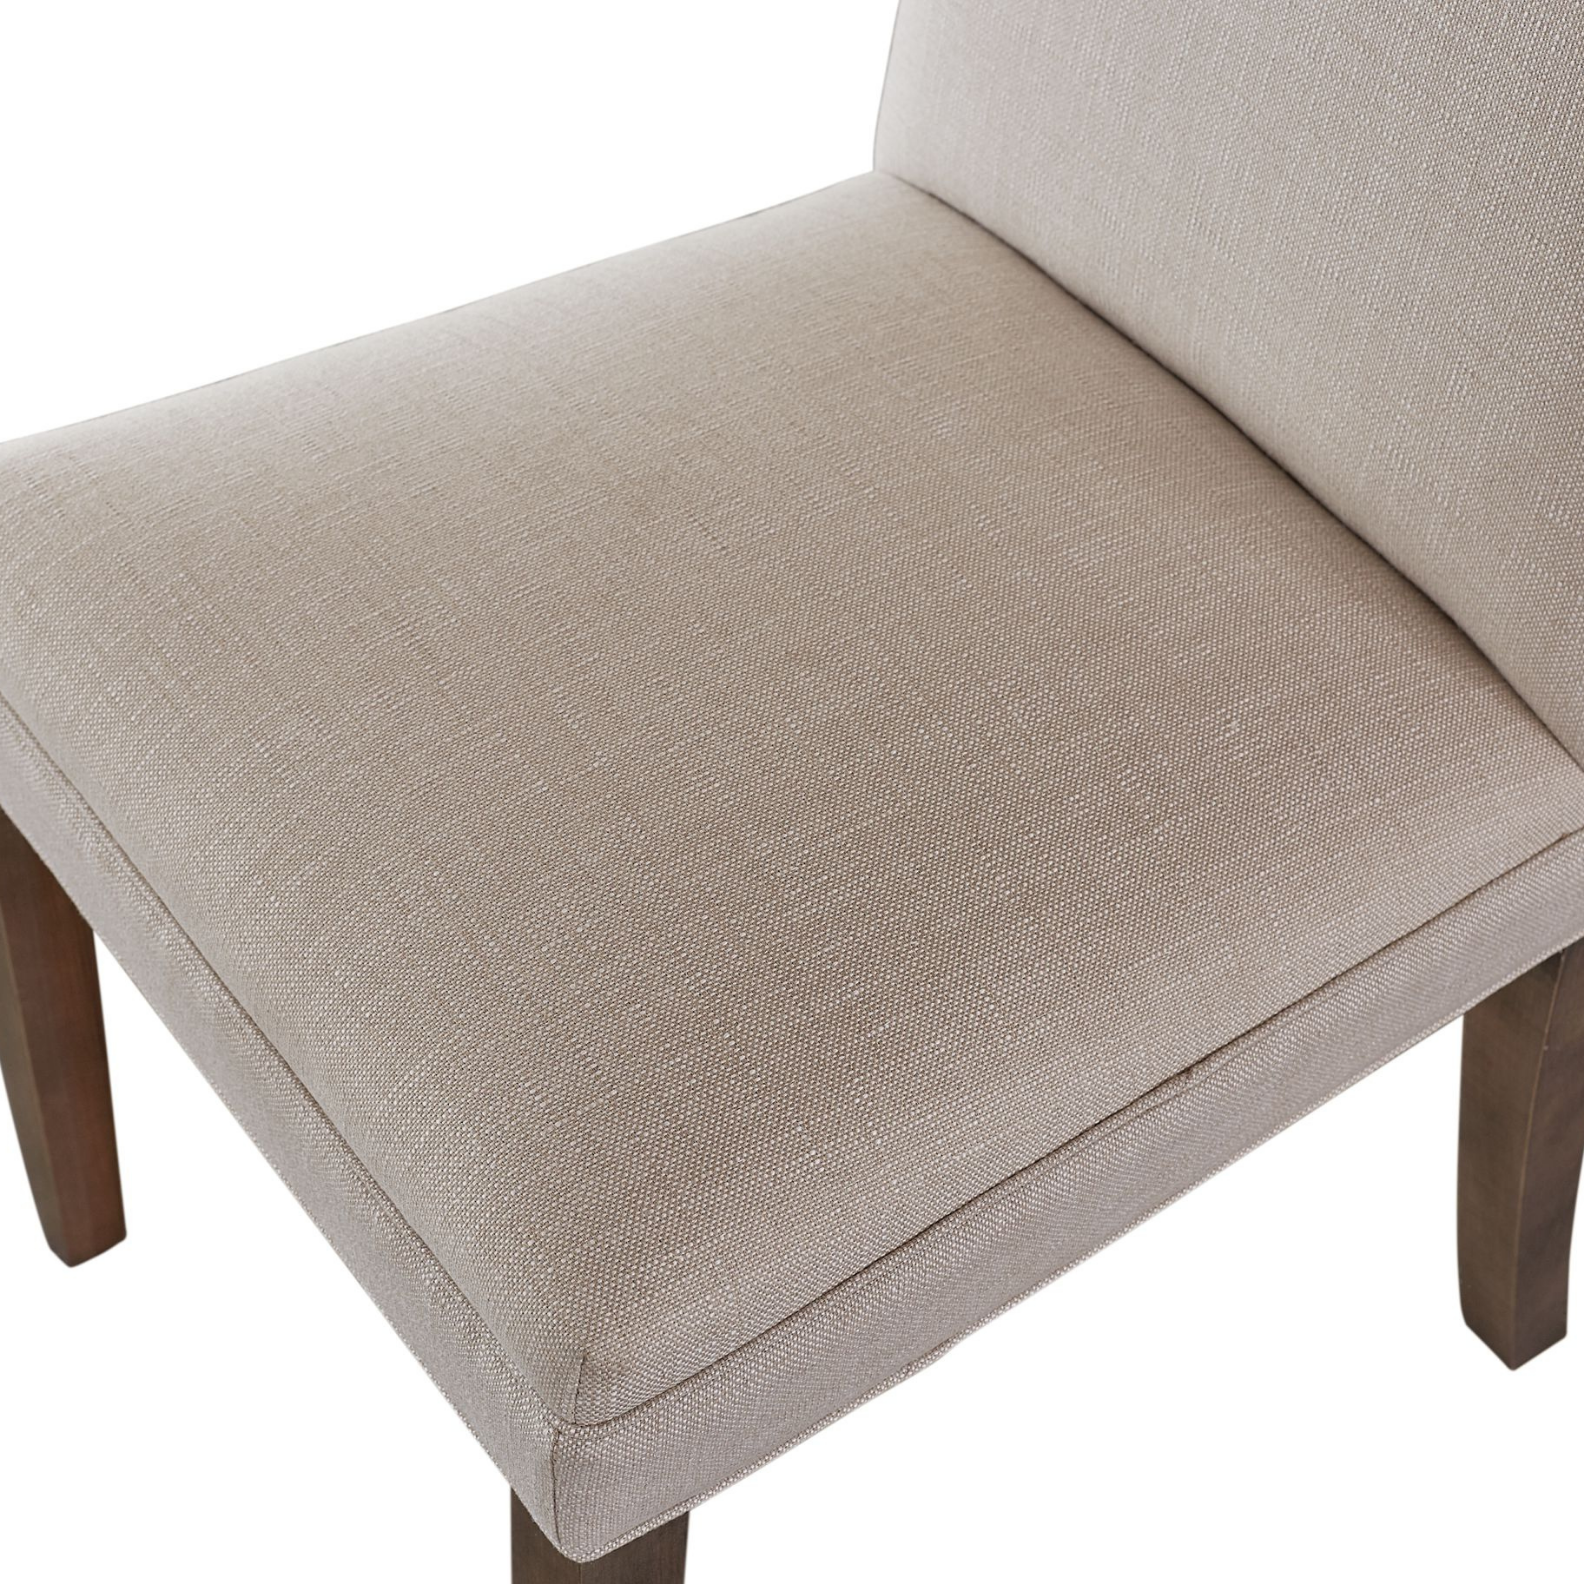 Marge Upholstered Dining Chair